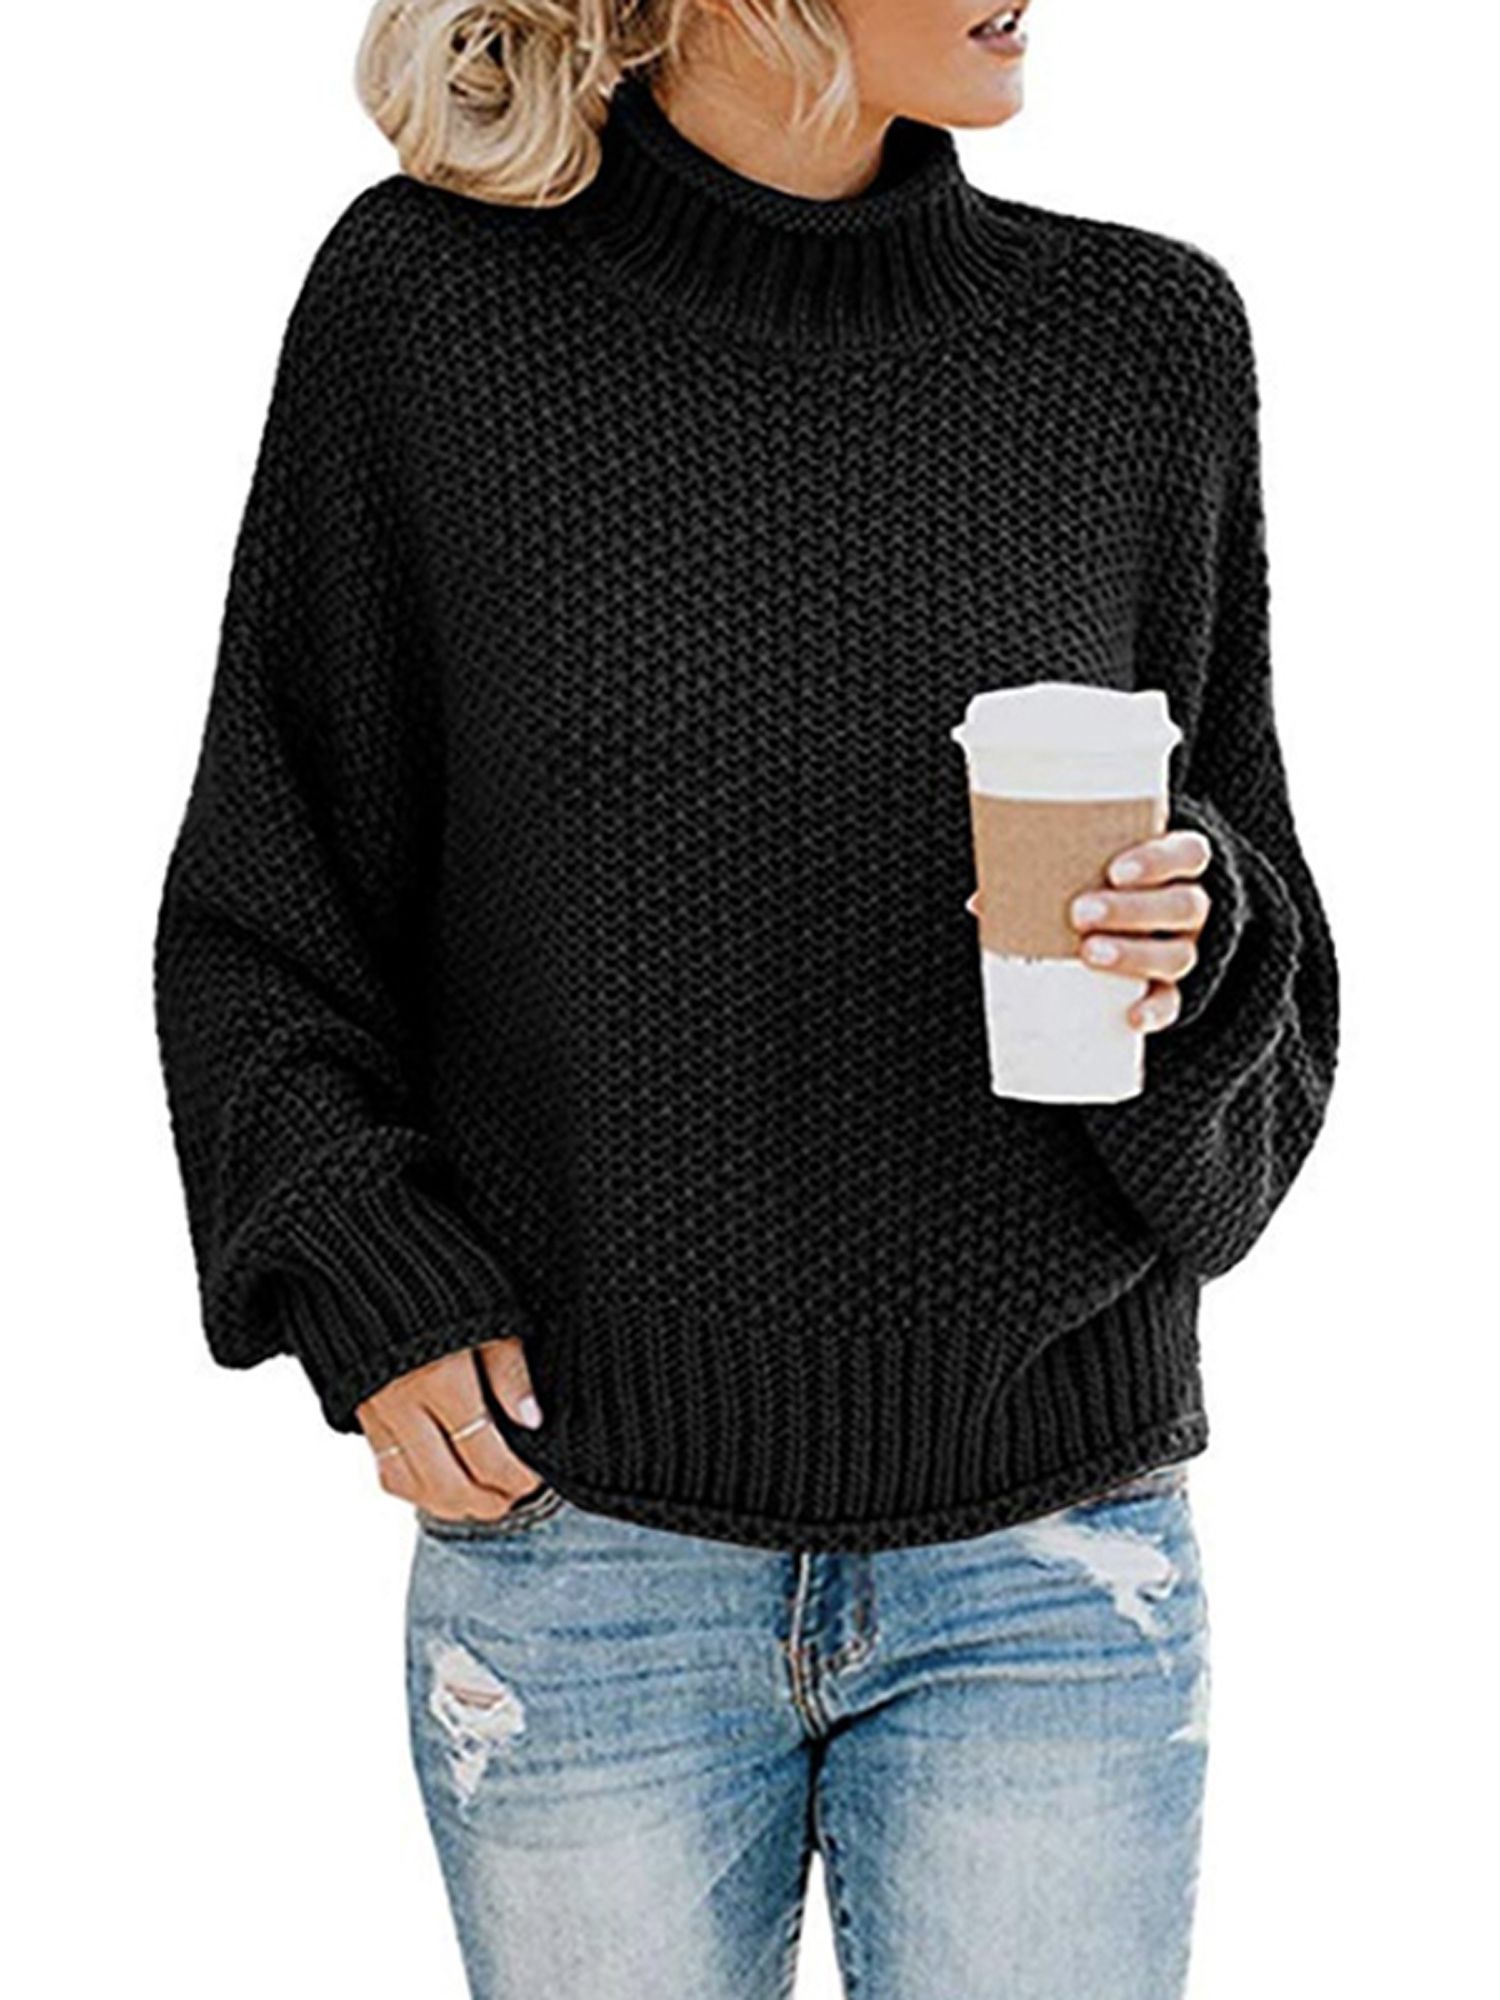 Women's Long Sleeve Sweaters Turtleneck Loose Soft Knitted Casual Pullover | Walmart (US)